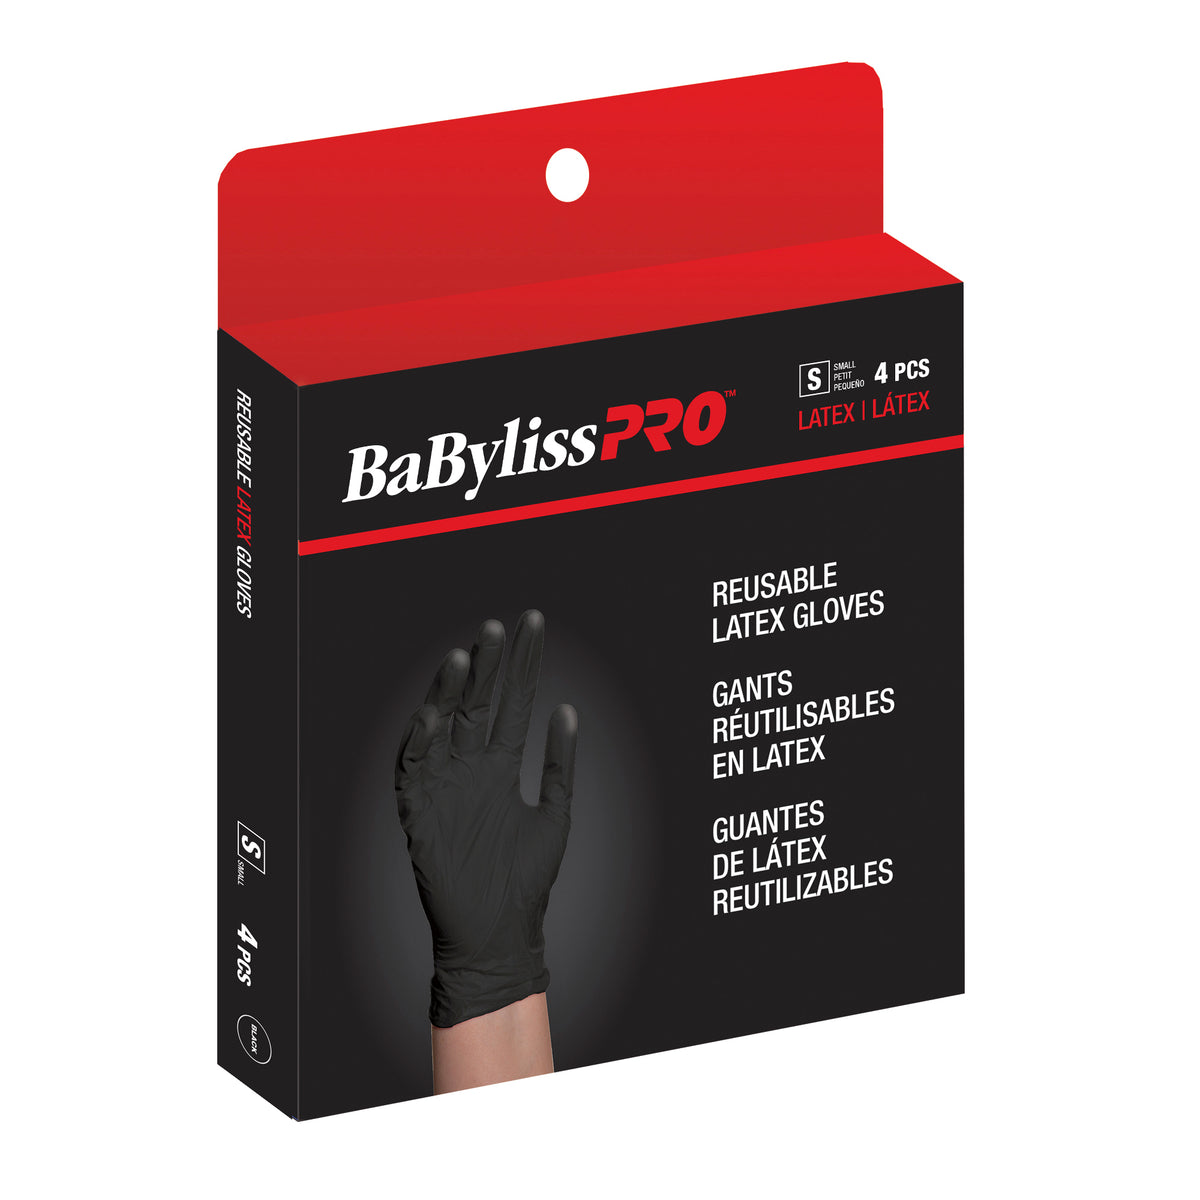 BaBylissPRO Reusable Latex Gloves, Small – Box of 4